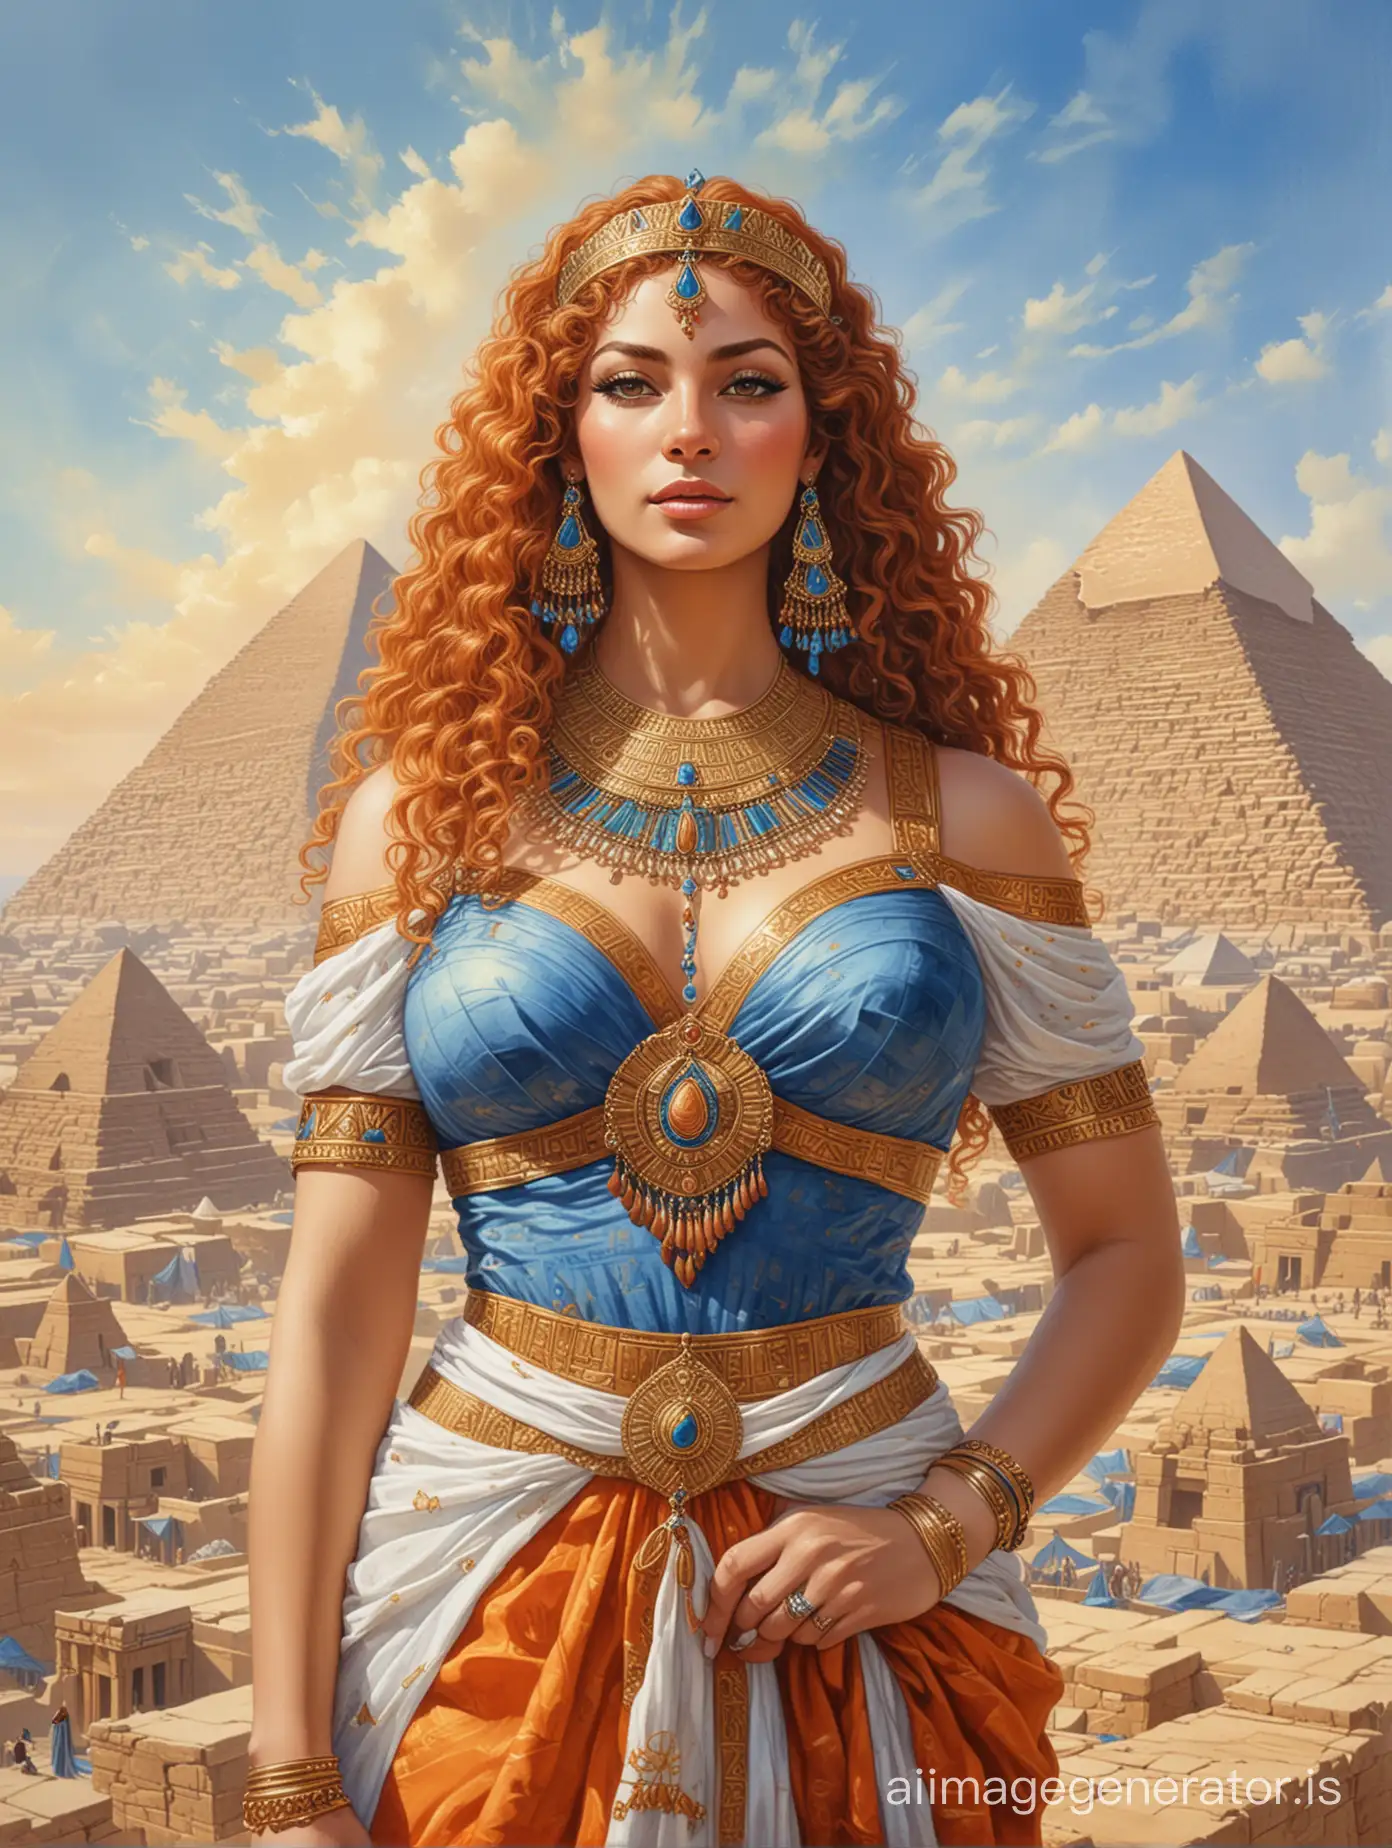 Egyptian-Queen-in-Luxurious-Royal-Attire-with-Pyramids